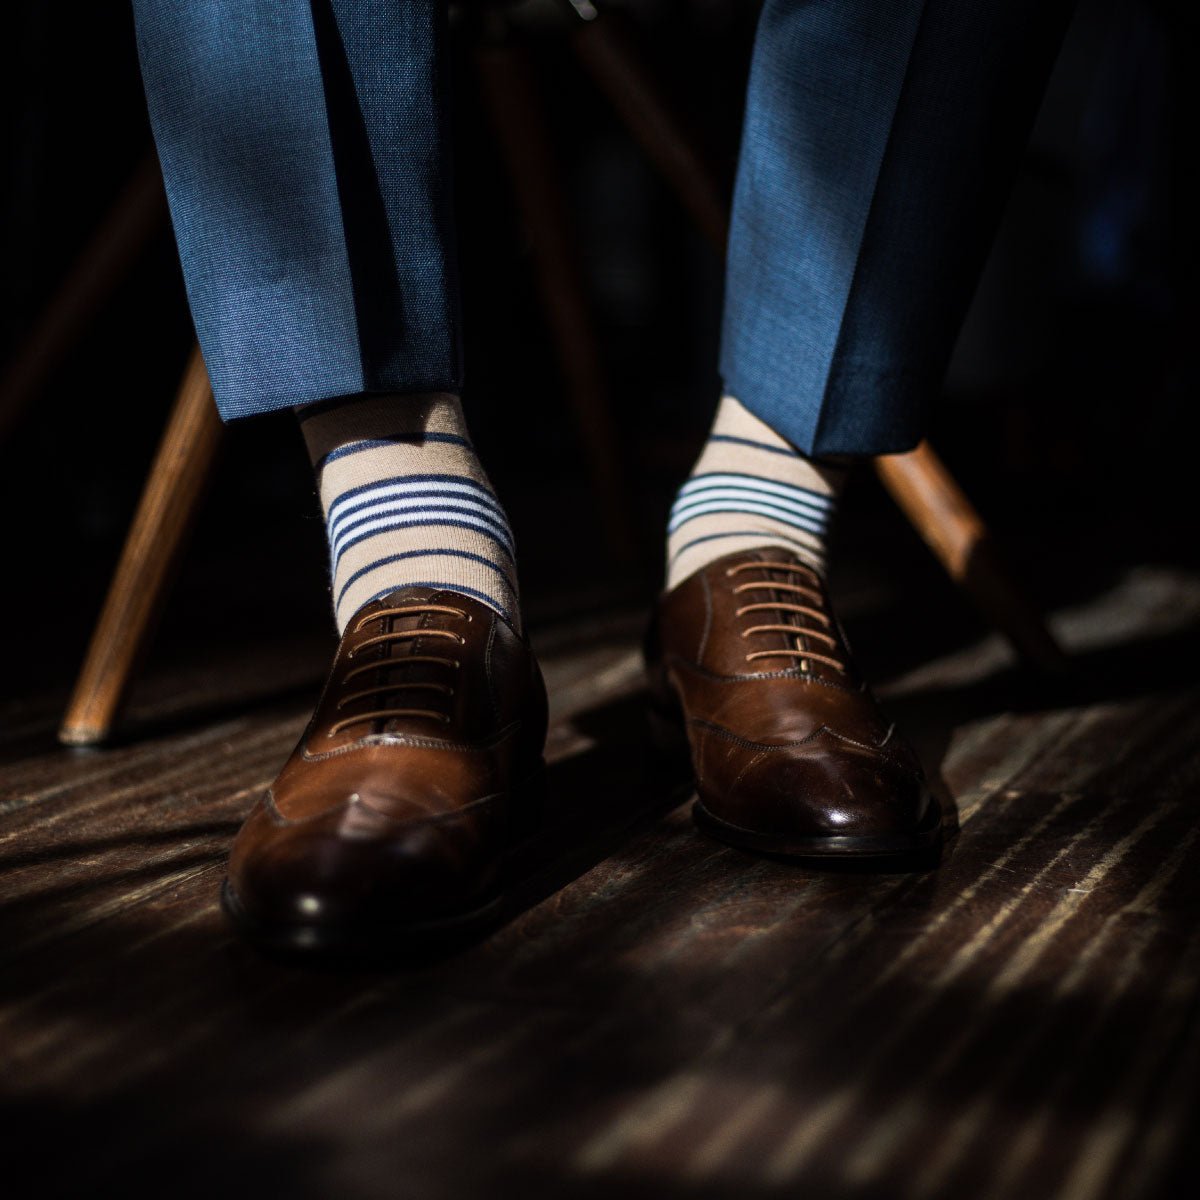 Man sitting and wearing blue trousers with tan, navy blue, and white striped dress socks and dark brown dress shoes